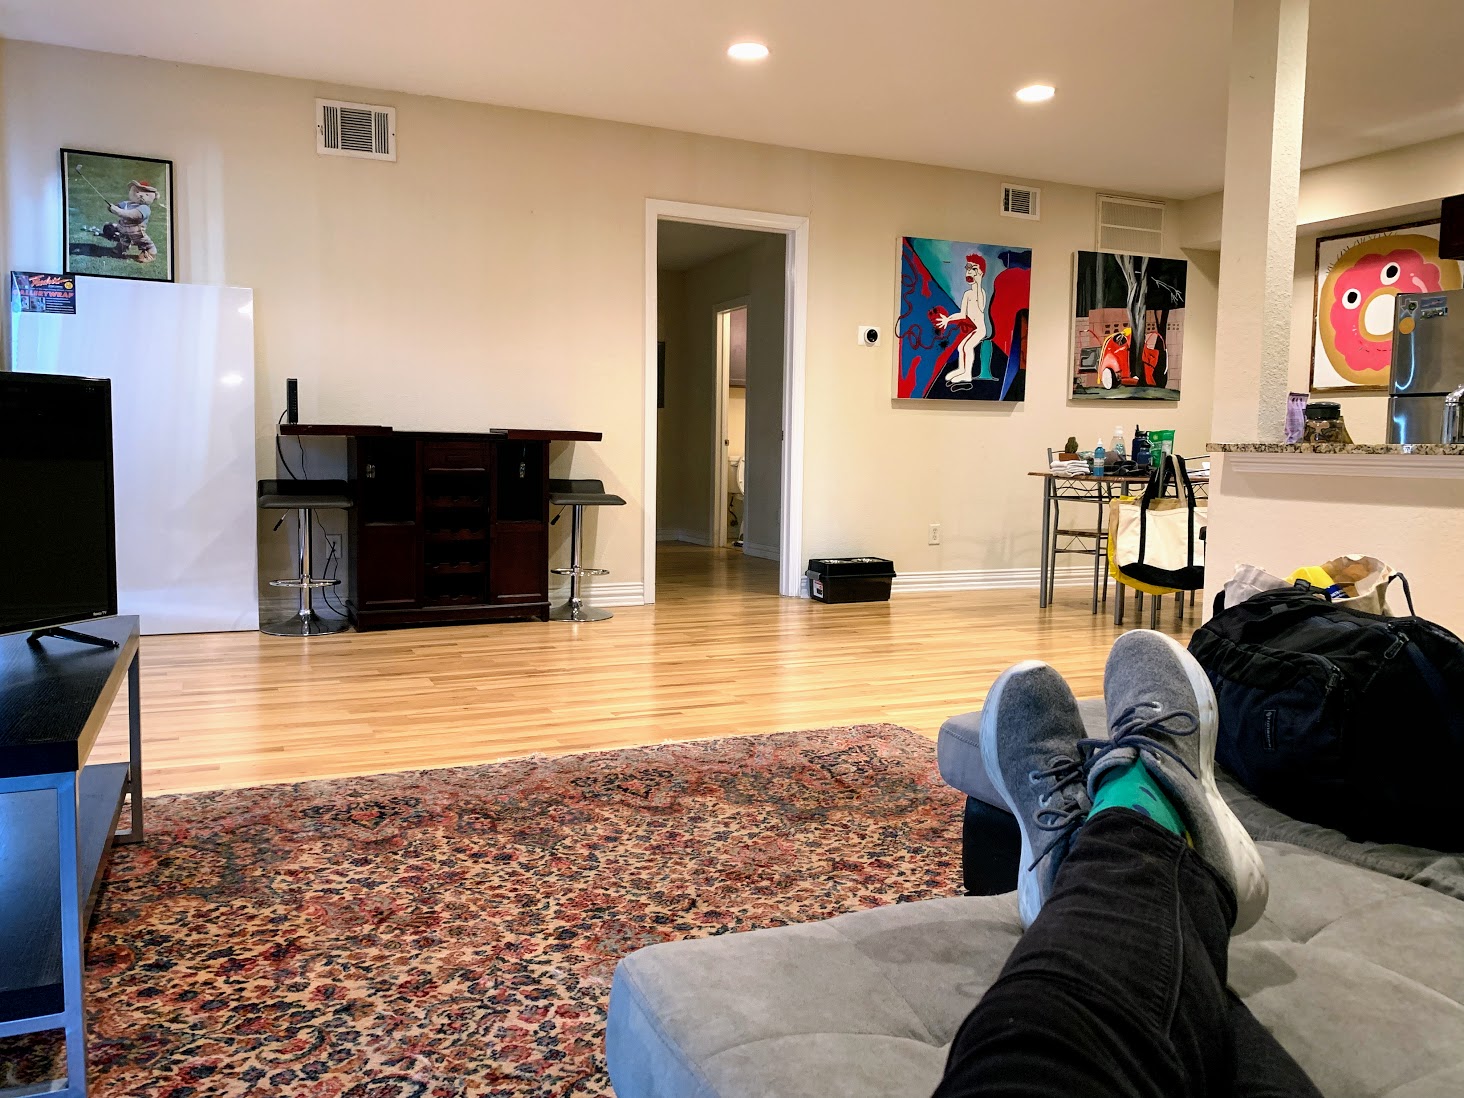 a person's legs on a couch in a living room